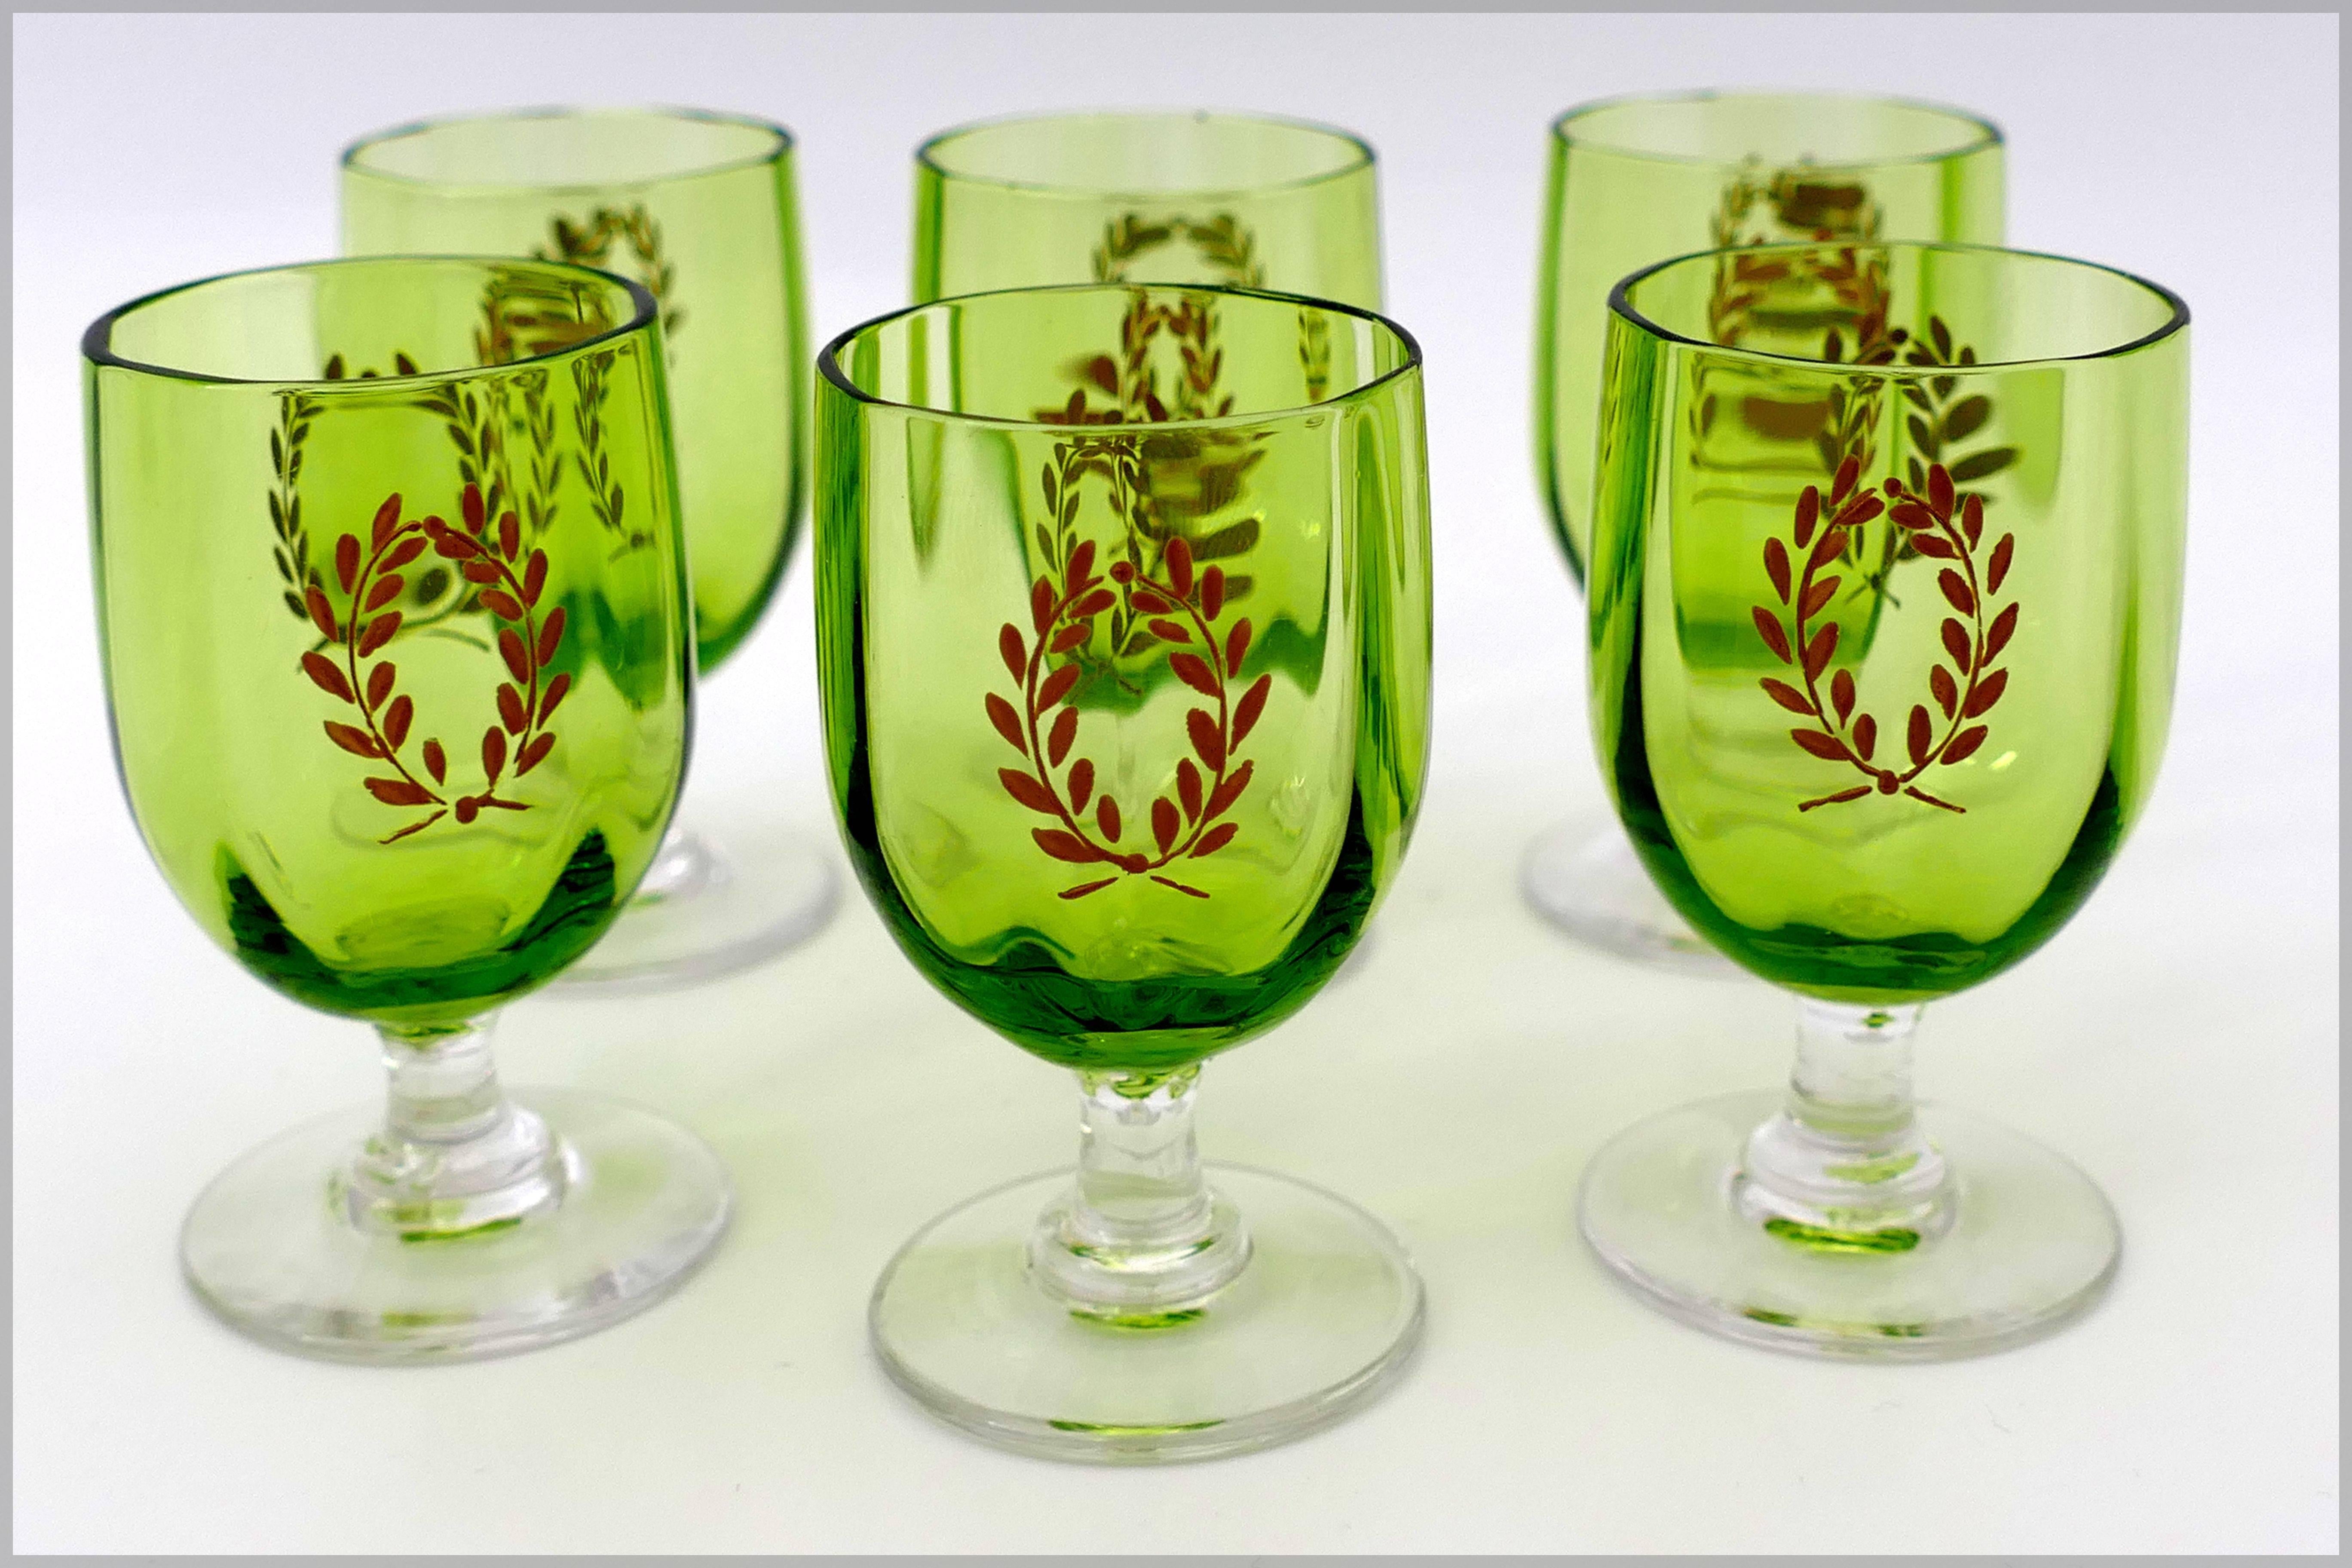 French 1900 Rare Baccarat Gold Green Chartreuse Crystal Liquor or Aperitif Service